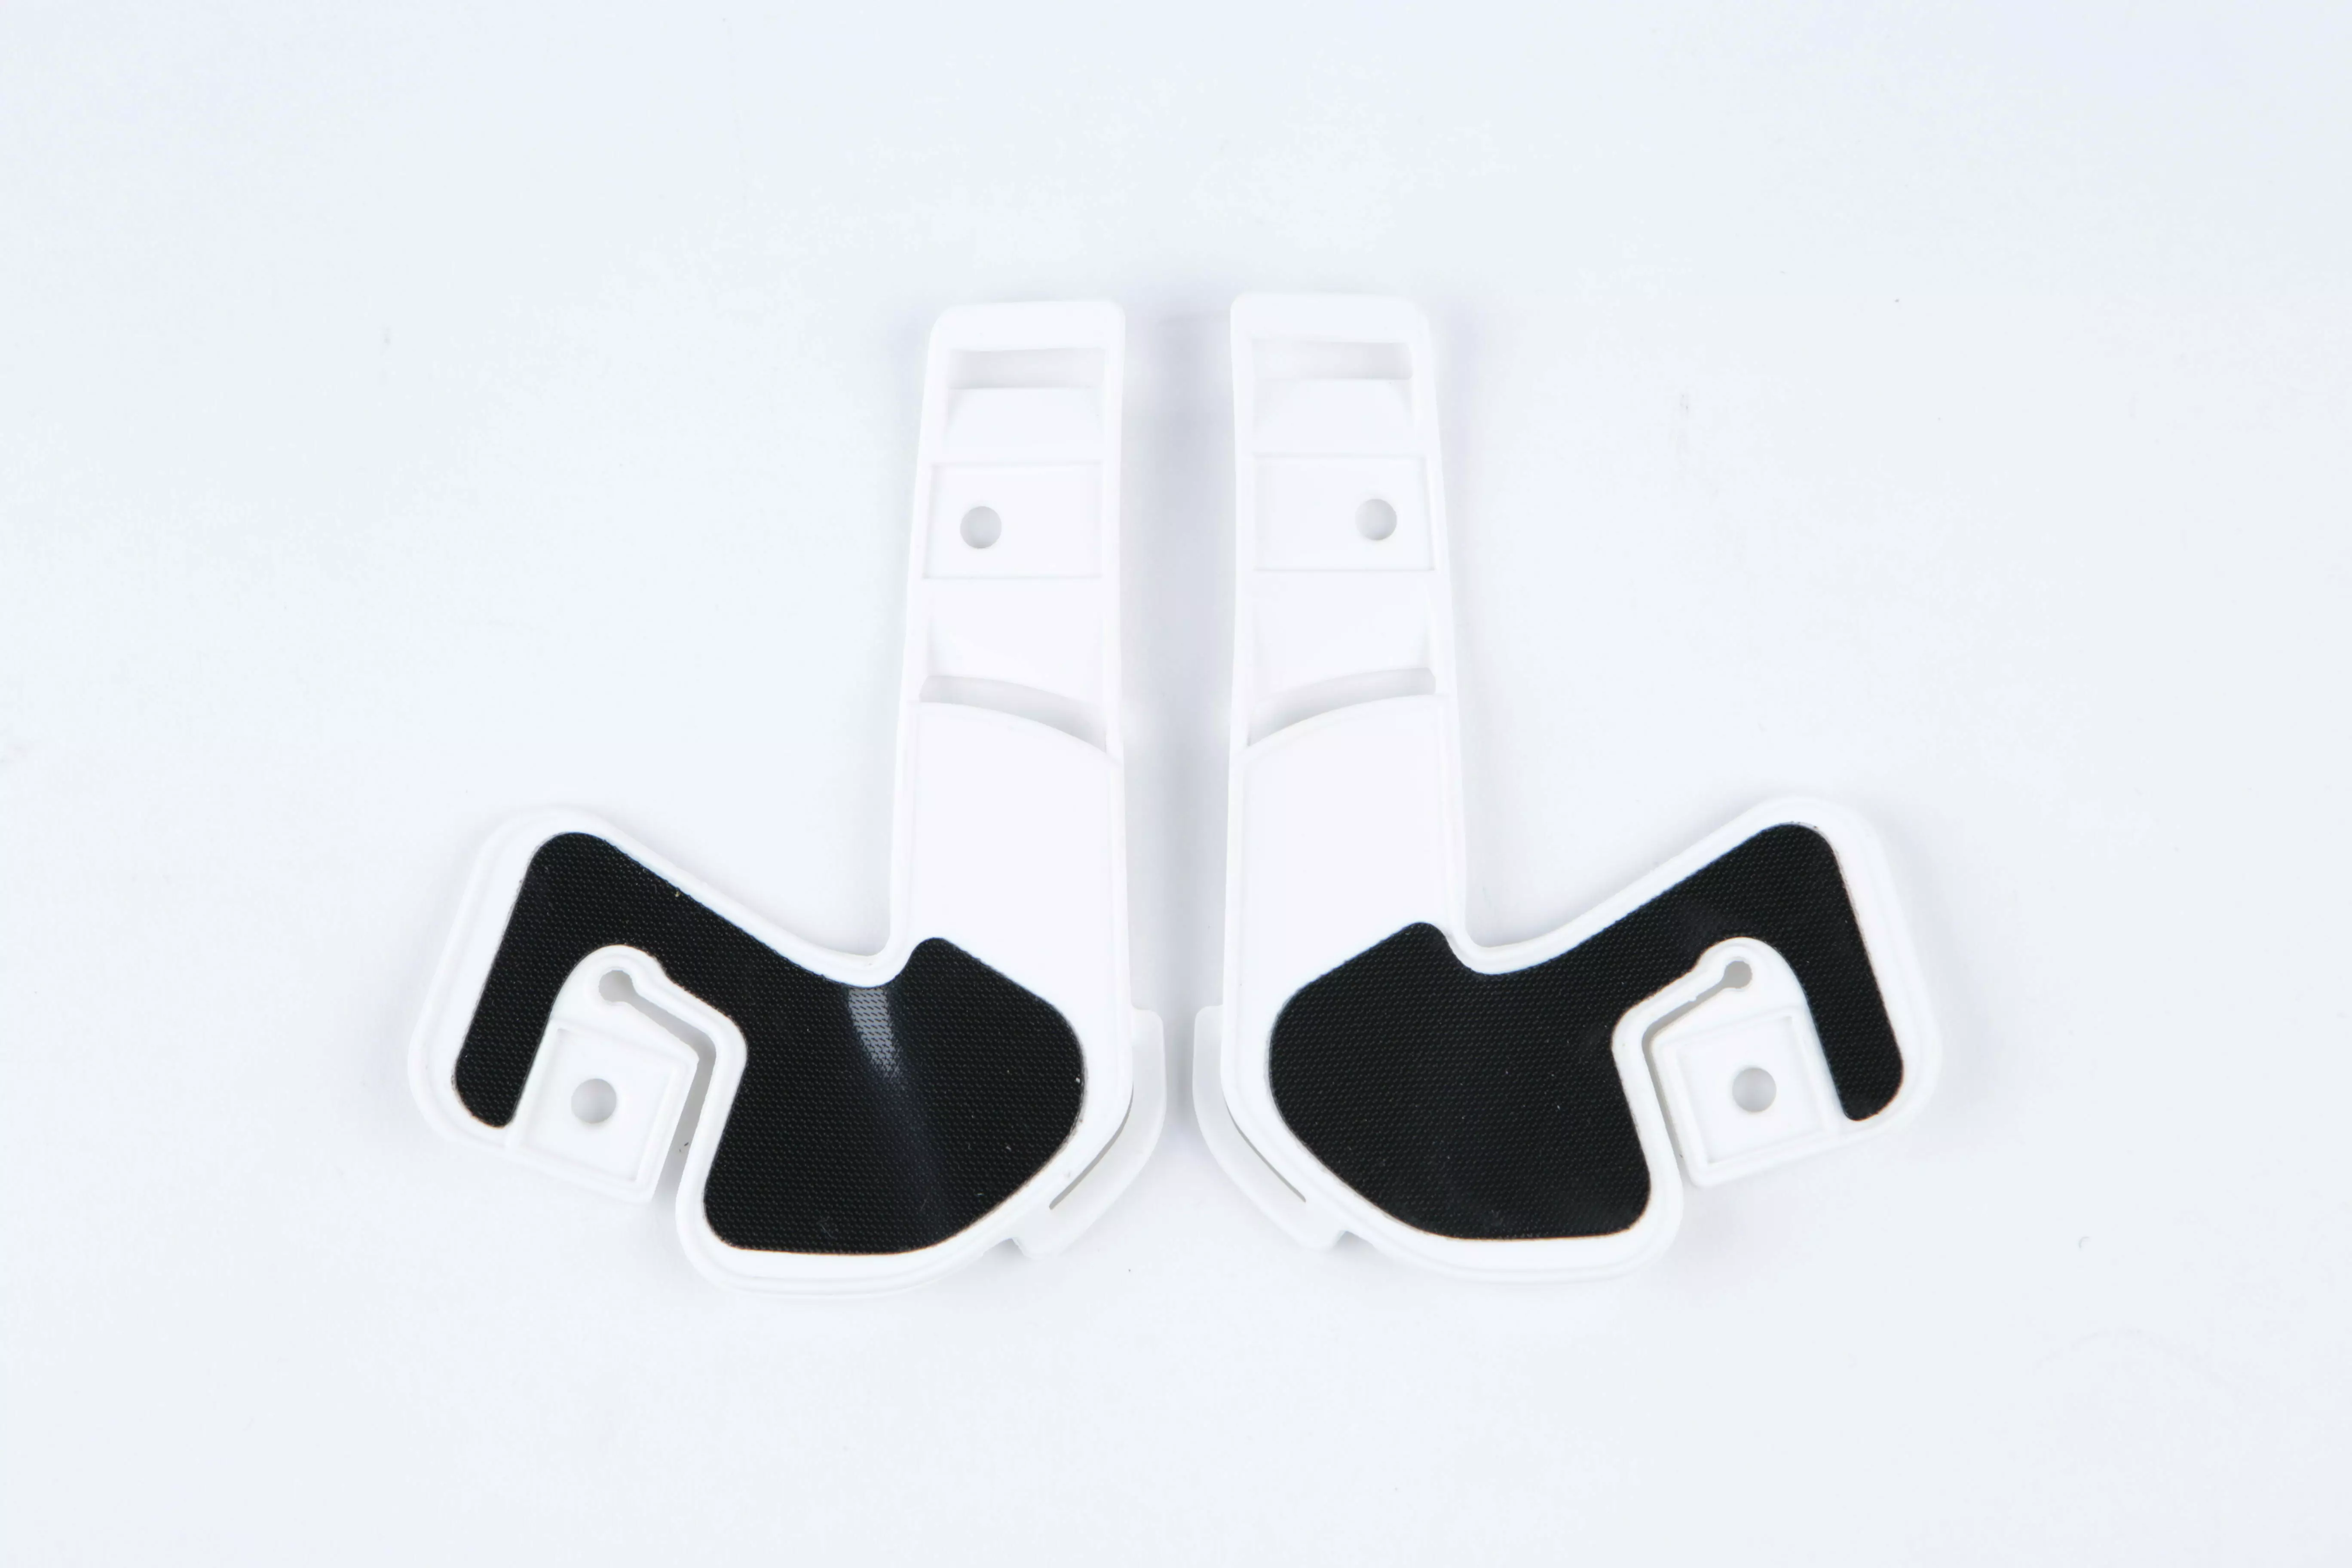 Two 3DX Jaw Plates against a white background.